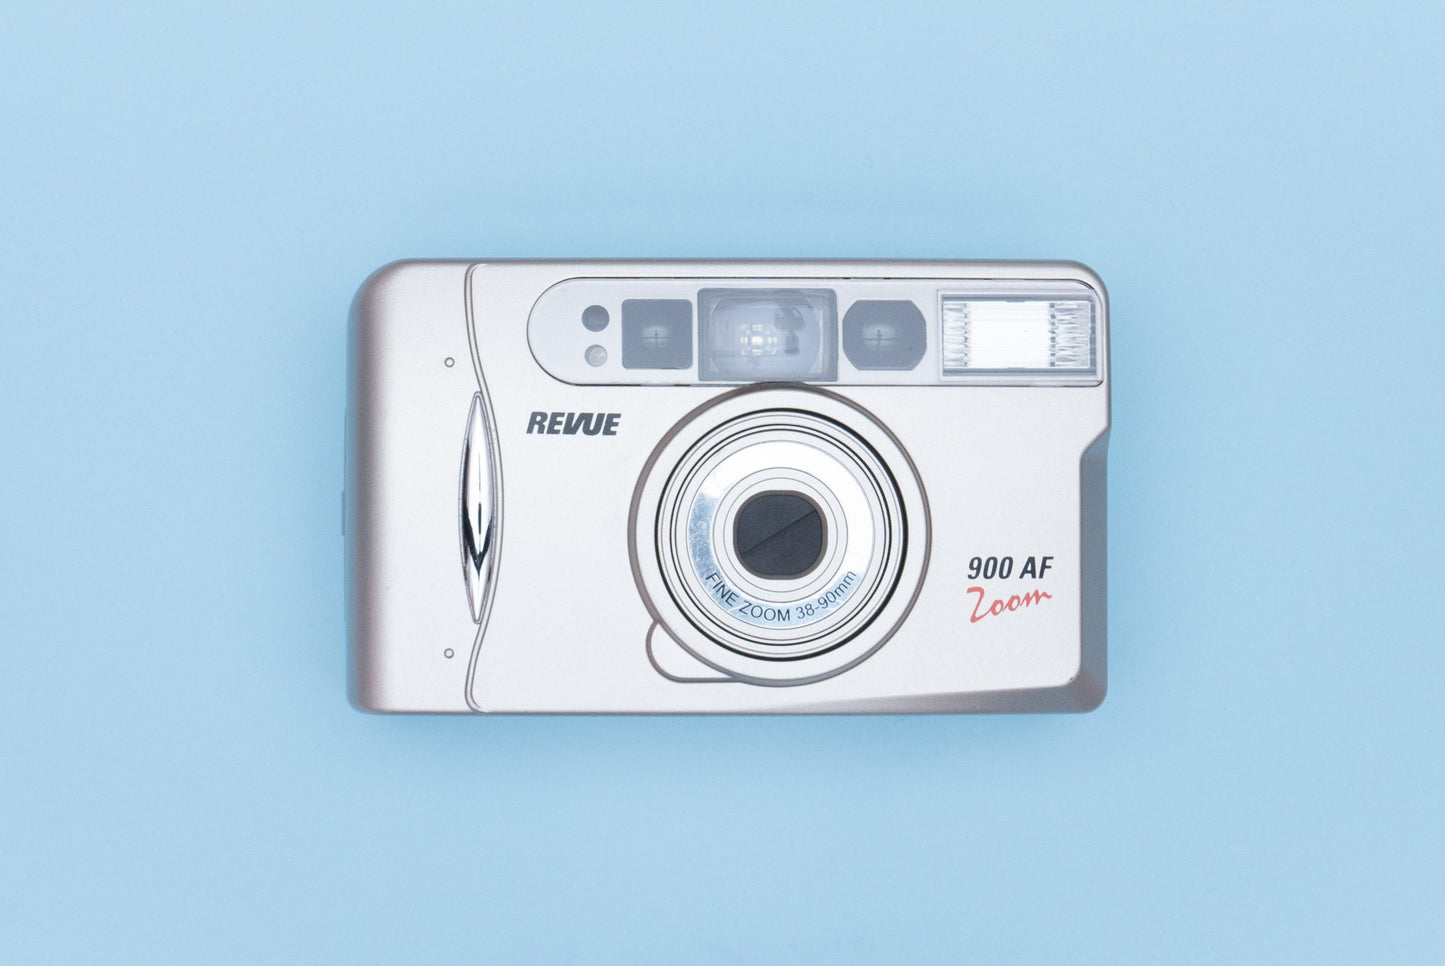 Revue 900 AF Zoom Compact Point and Shoot 35mm Film Camera